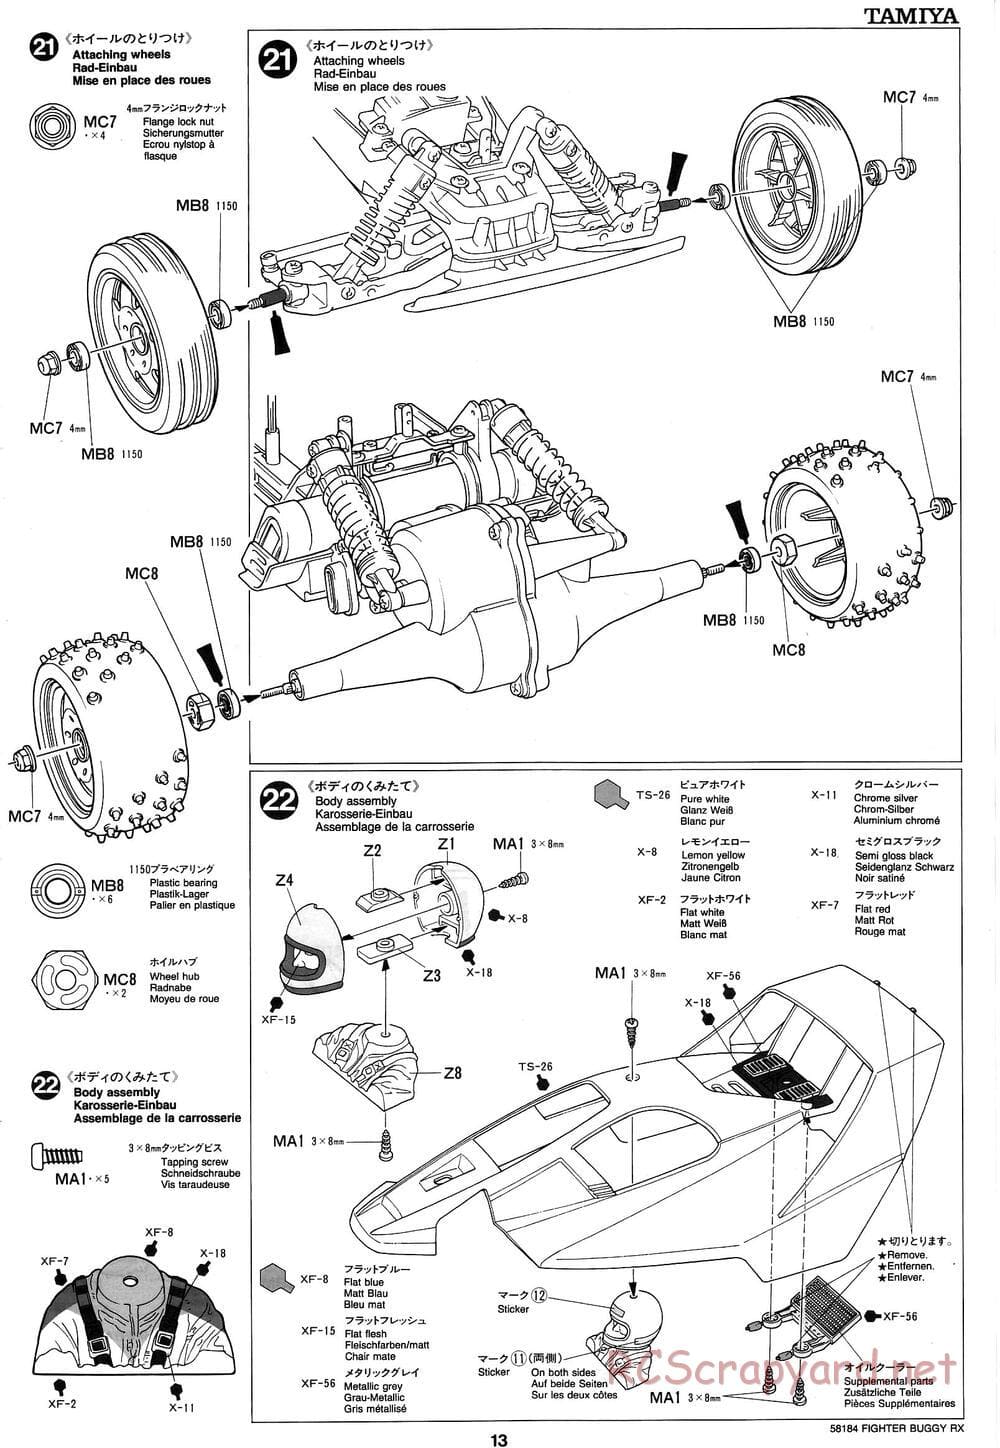 Tamiya - Fighter Buggy RX Chassis - Manual - Page 13